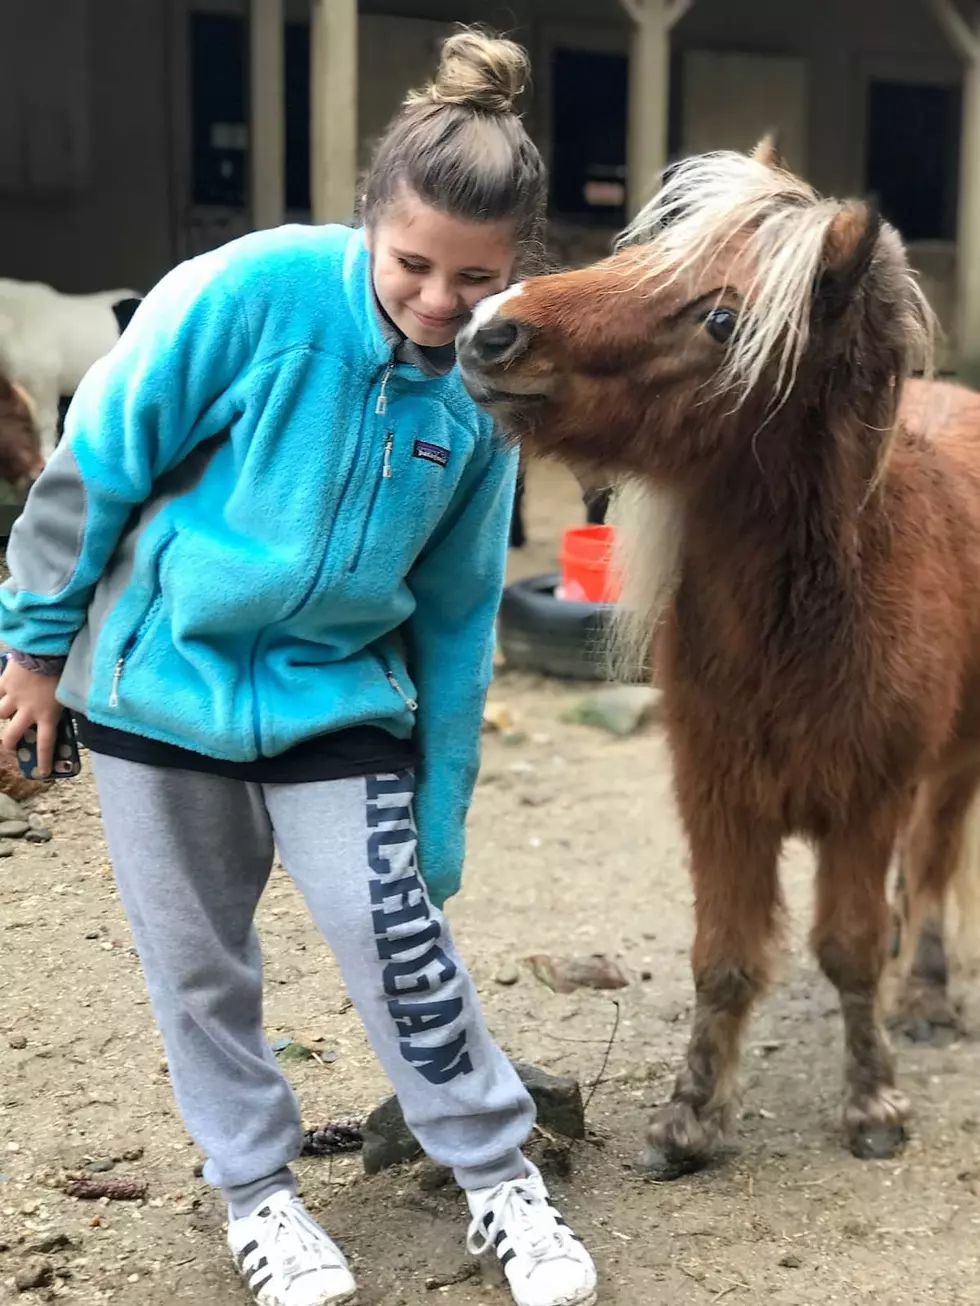 Become Best Friends With Magical Miniature Horses at a Farm in New Hampshire